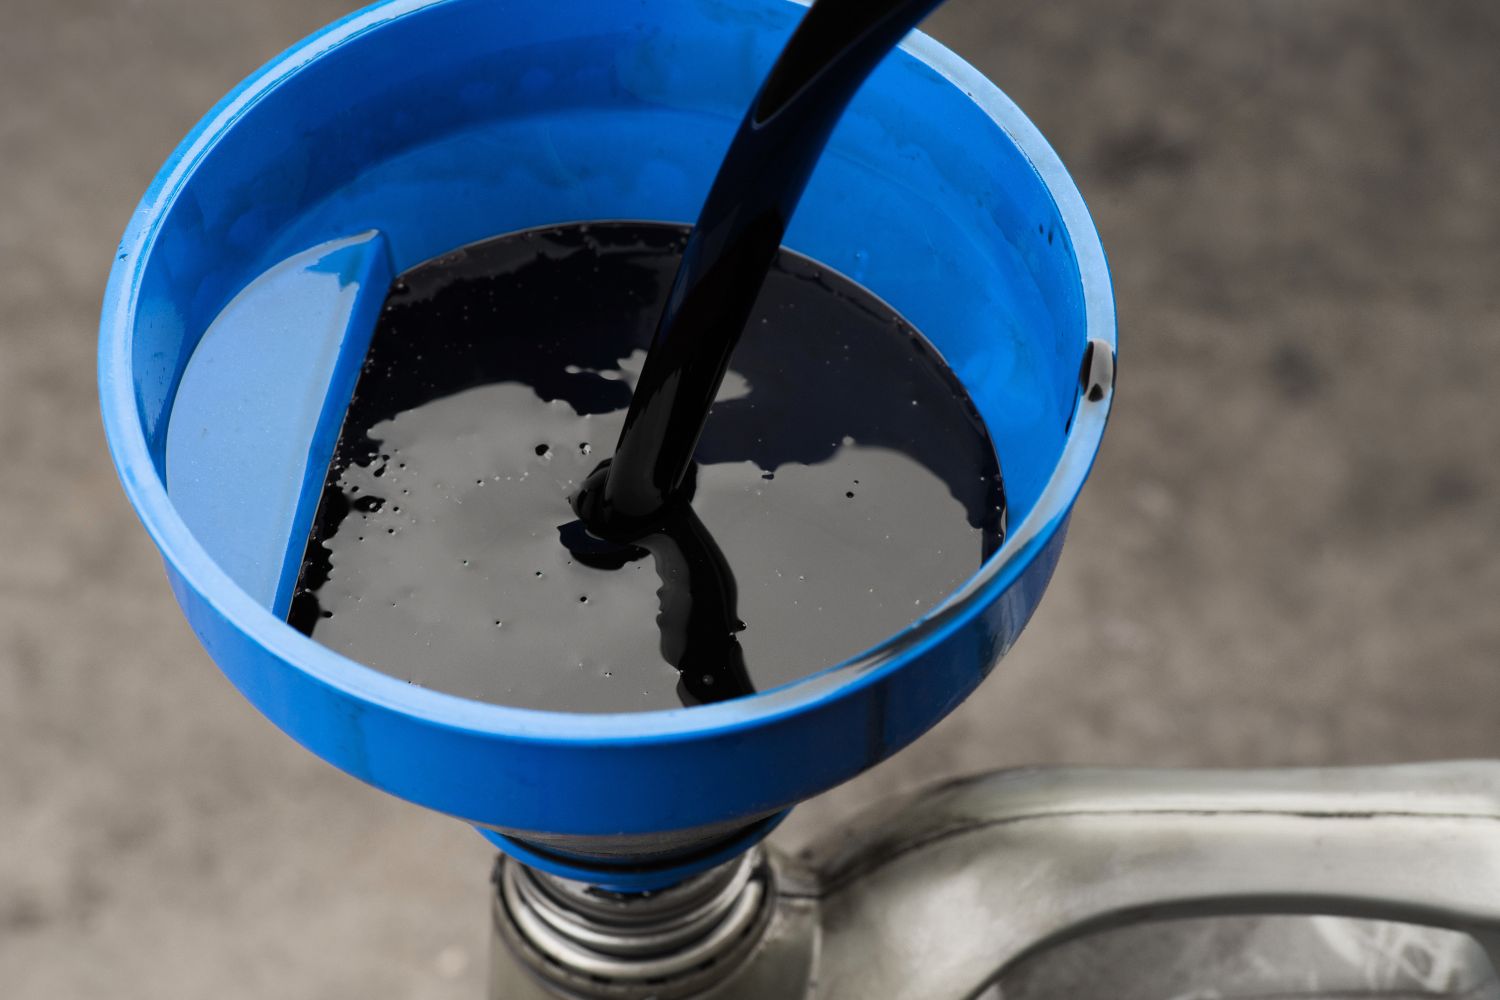 Image of black oil being poured through a blue plastic funnel into a gray plastic container.